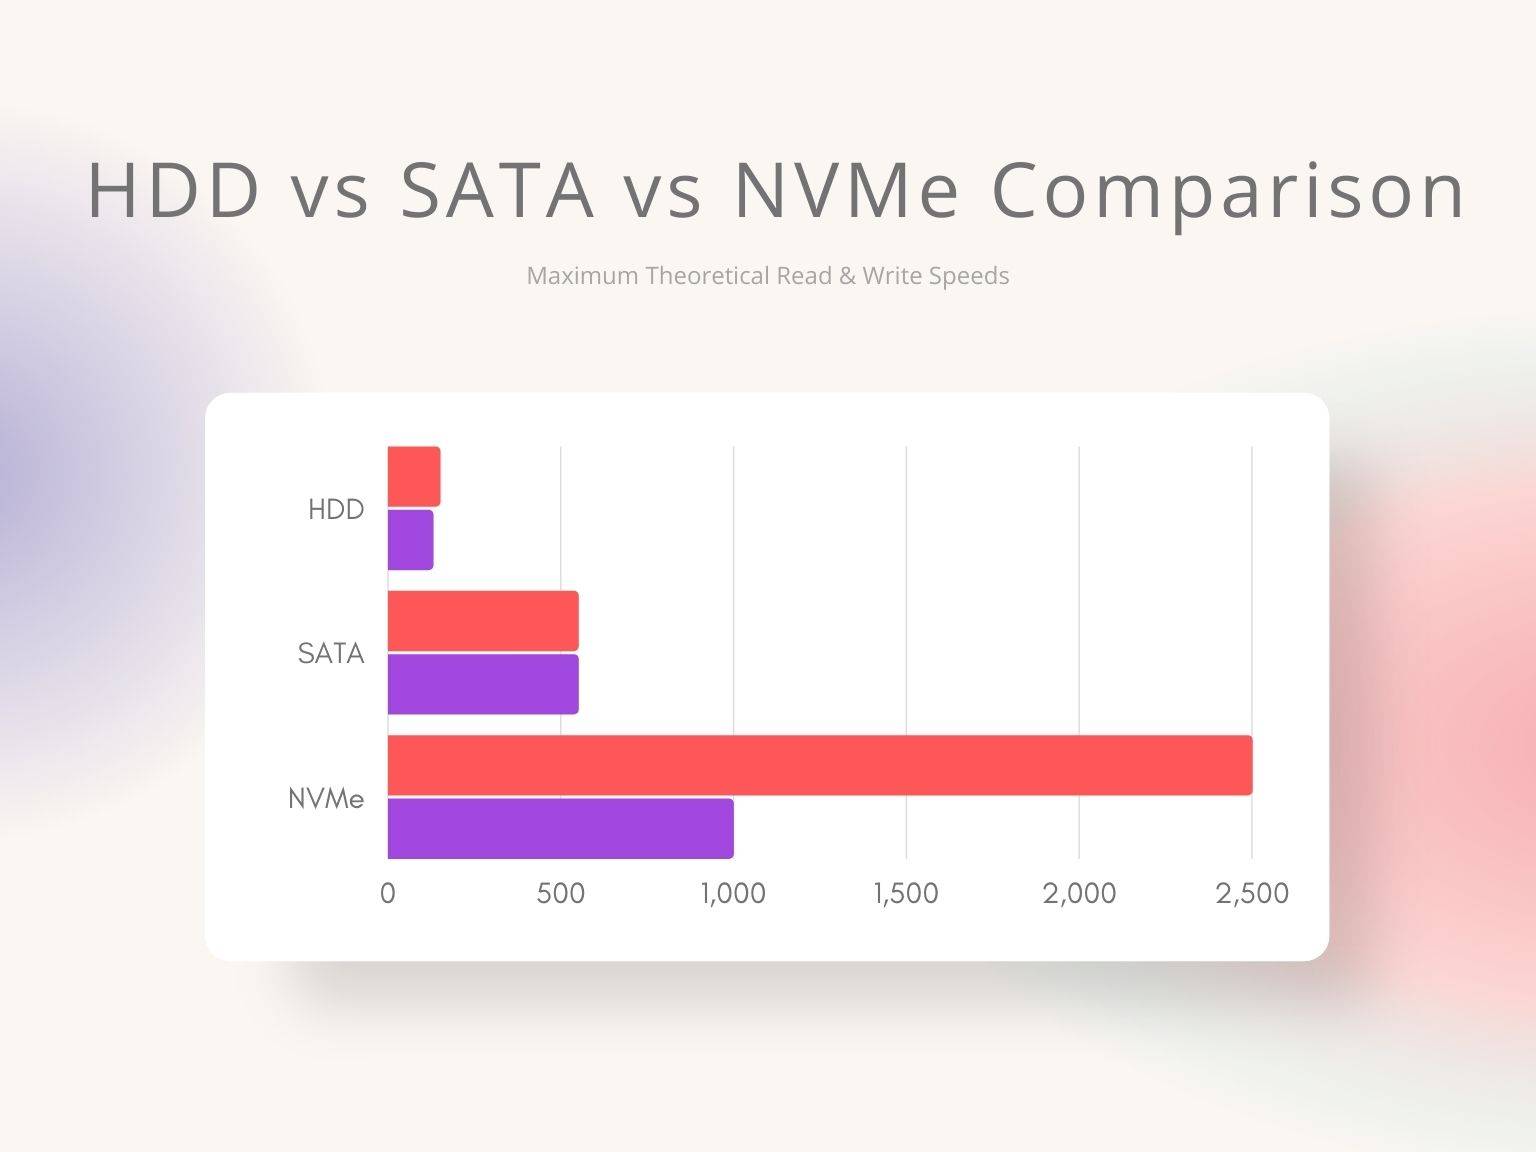 M.2 Two types of SSD: Differences between SATA & NVMe